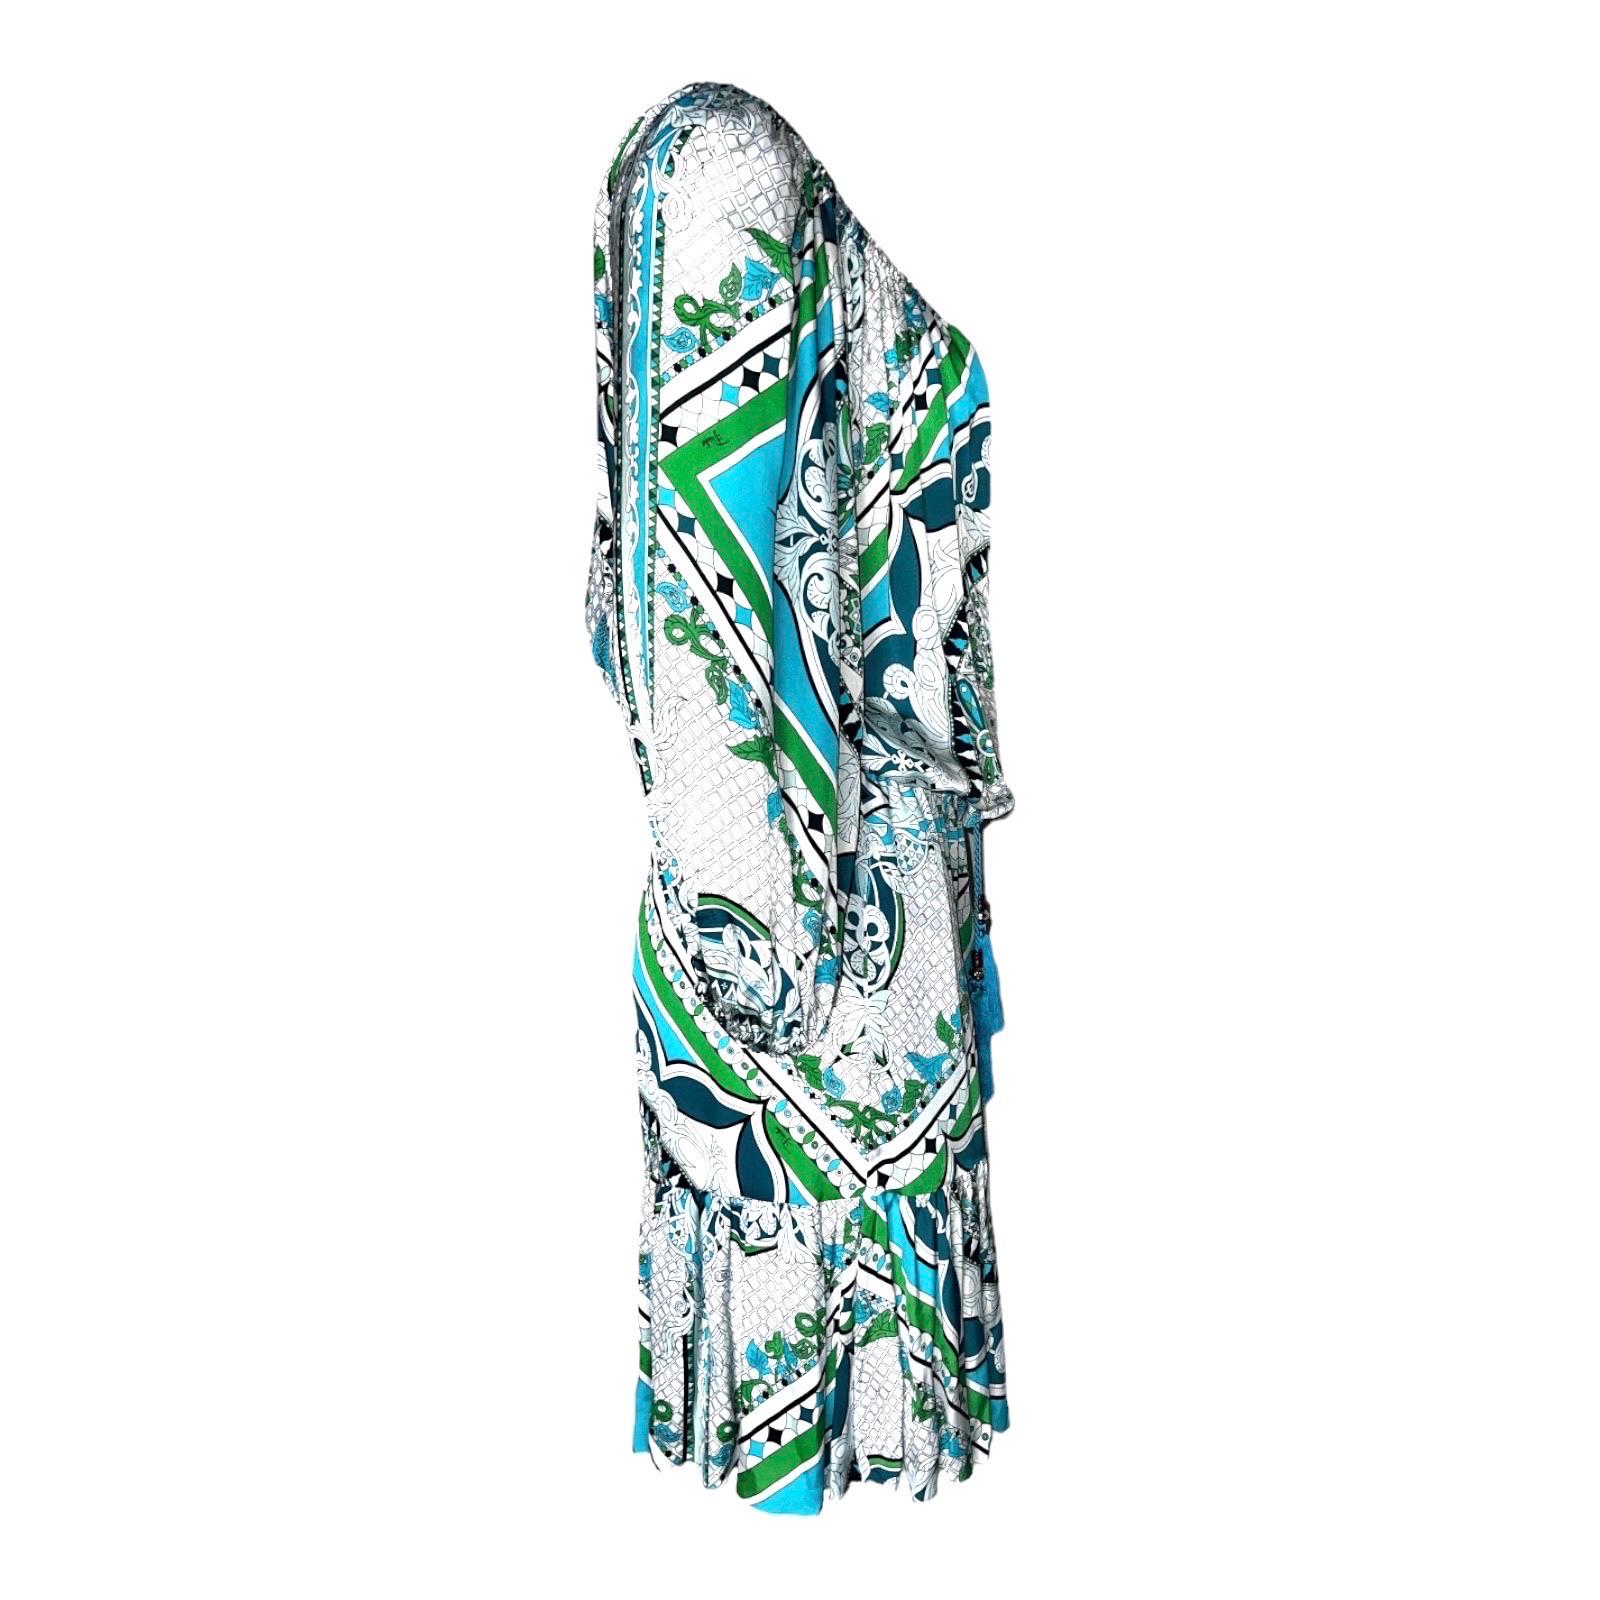 Bright colors illuminate the signature Emilio Pucci print covering a free-spirited silk dress. 
Gathers at the neckline, cuffs and waist shape the blousy silhouette, while tassels dangle above the flirty front keyhole. The versatile style can be